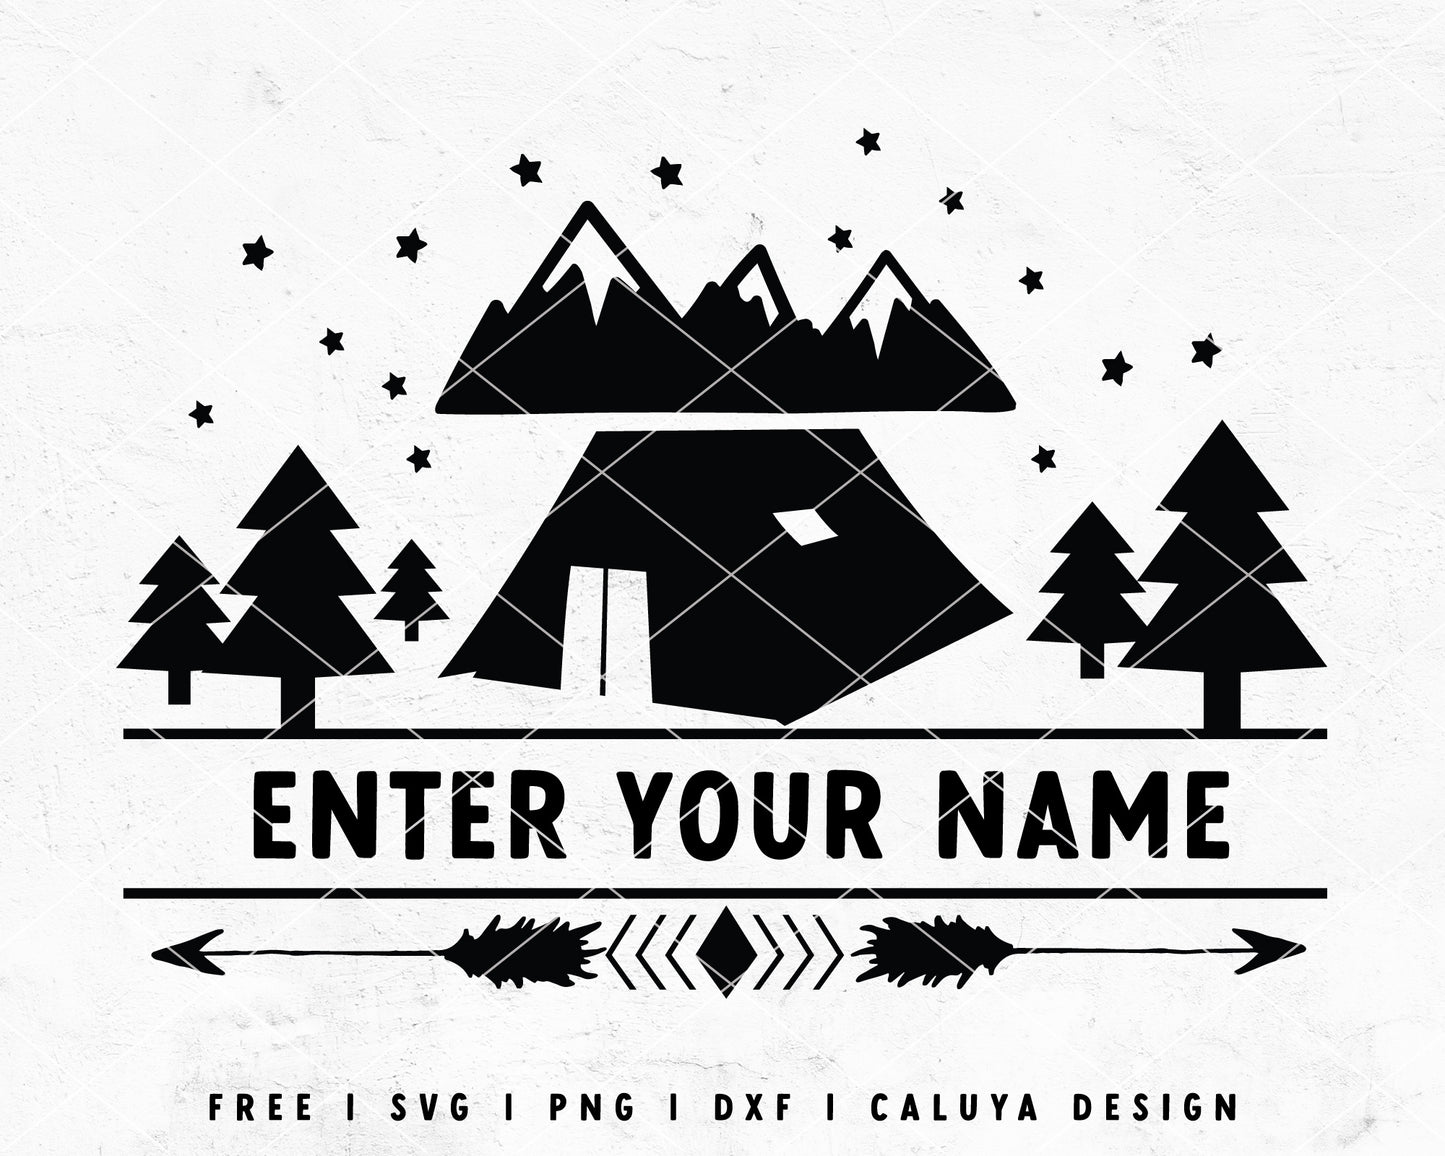  FREE Camp Sign SVG | Family SVG  Cut File for Cricut, Cameo Silhouette | Free SVG Cut File